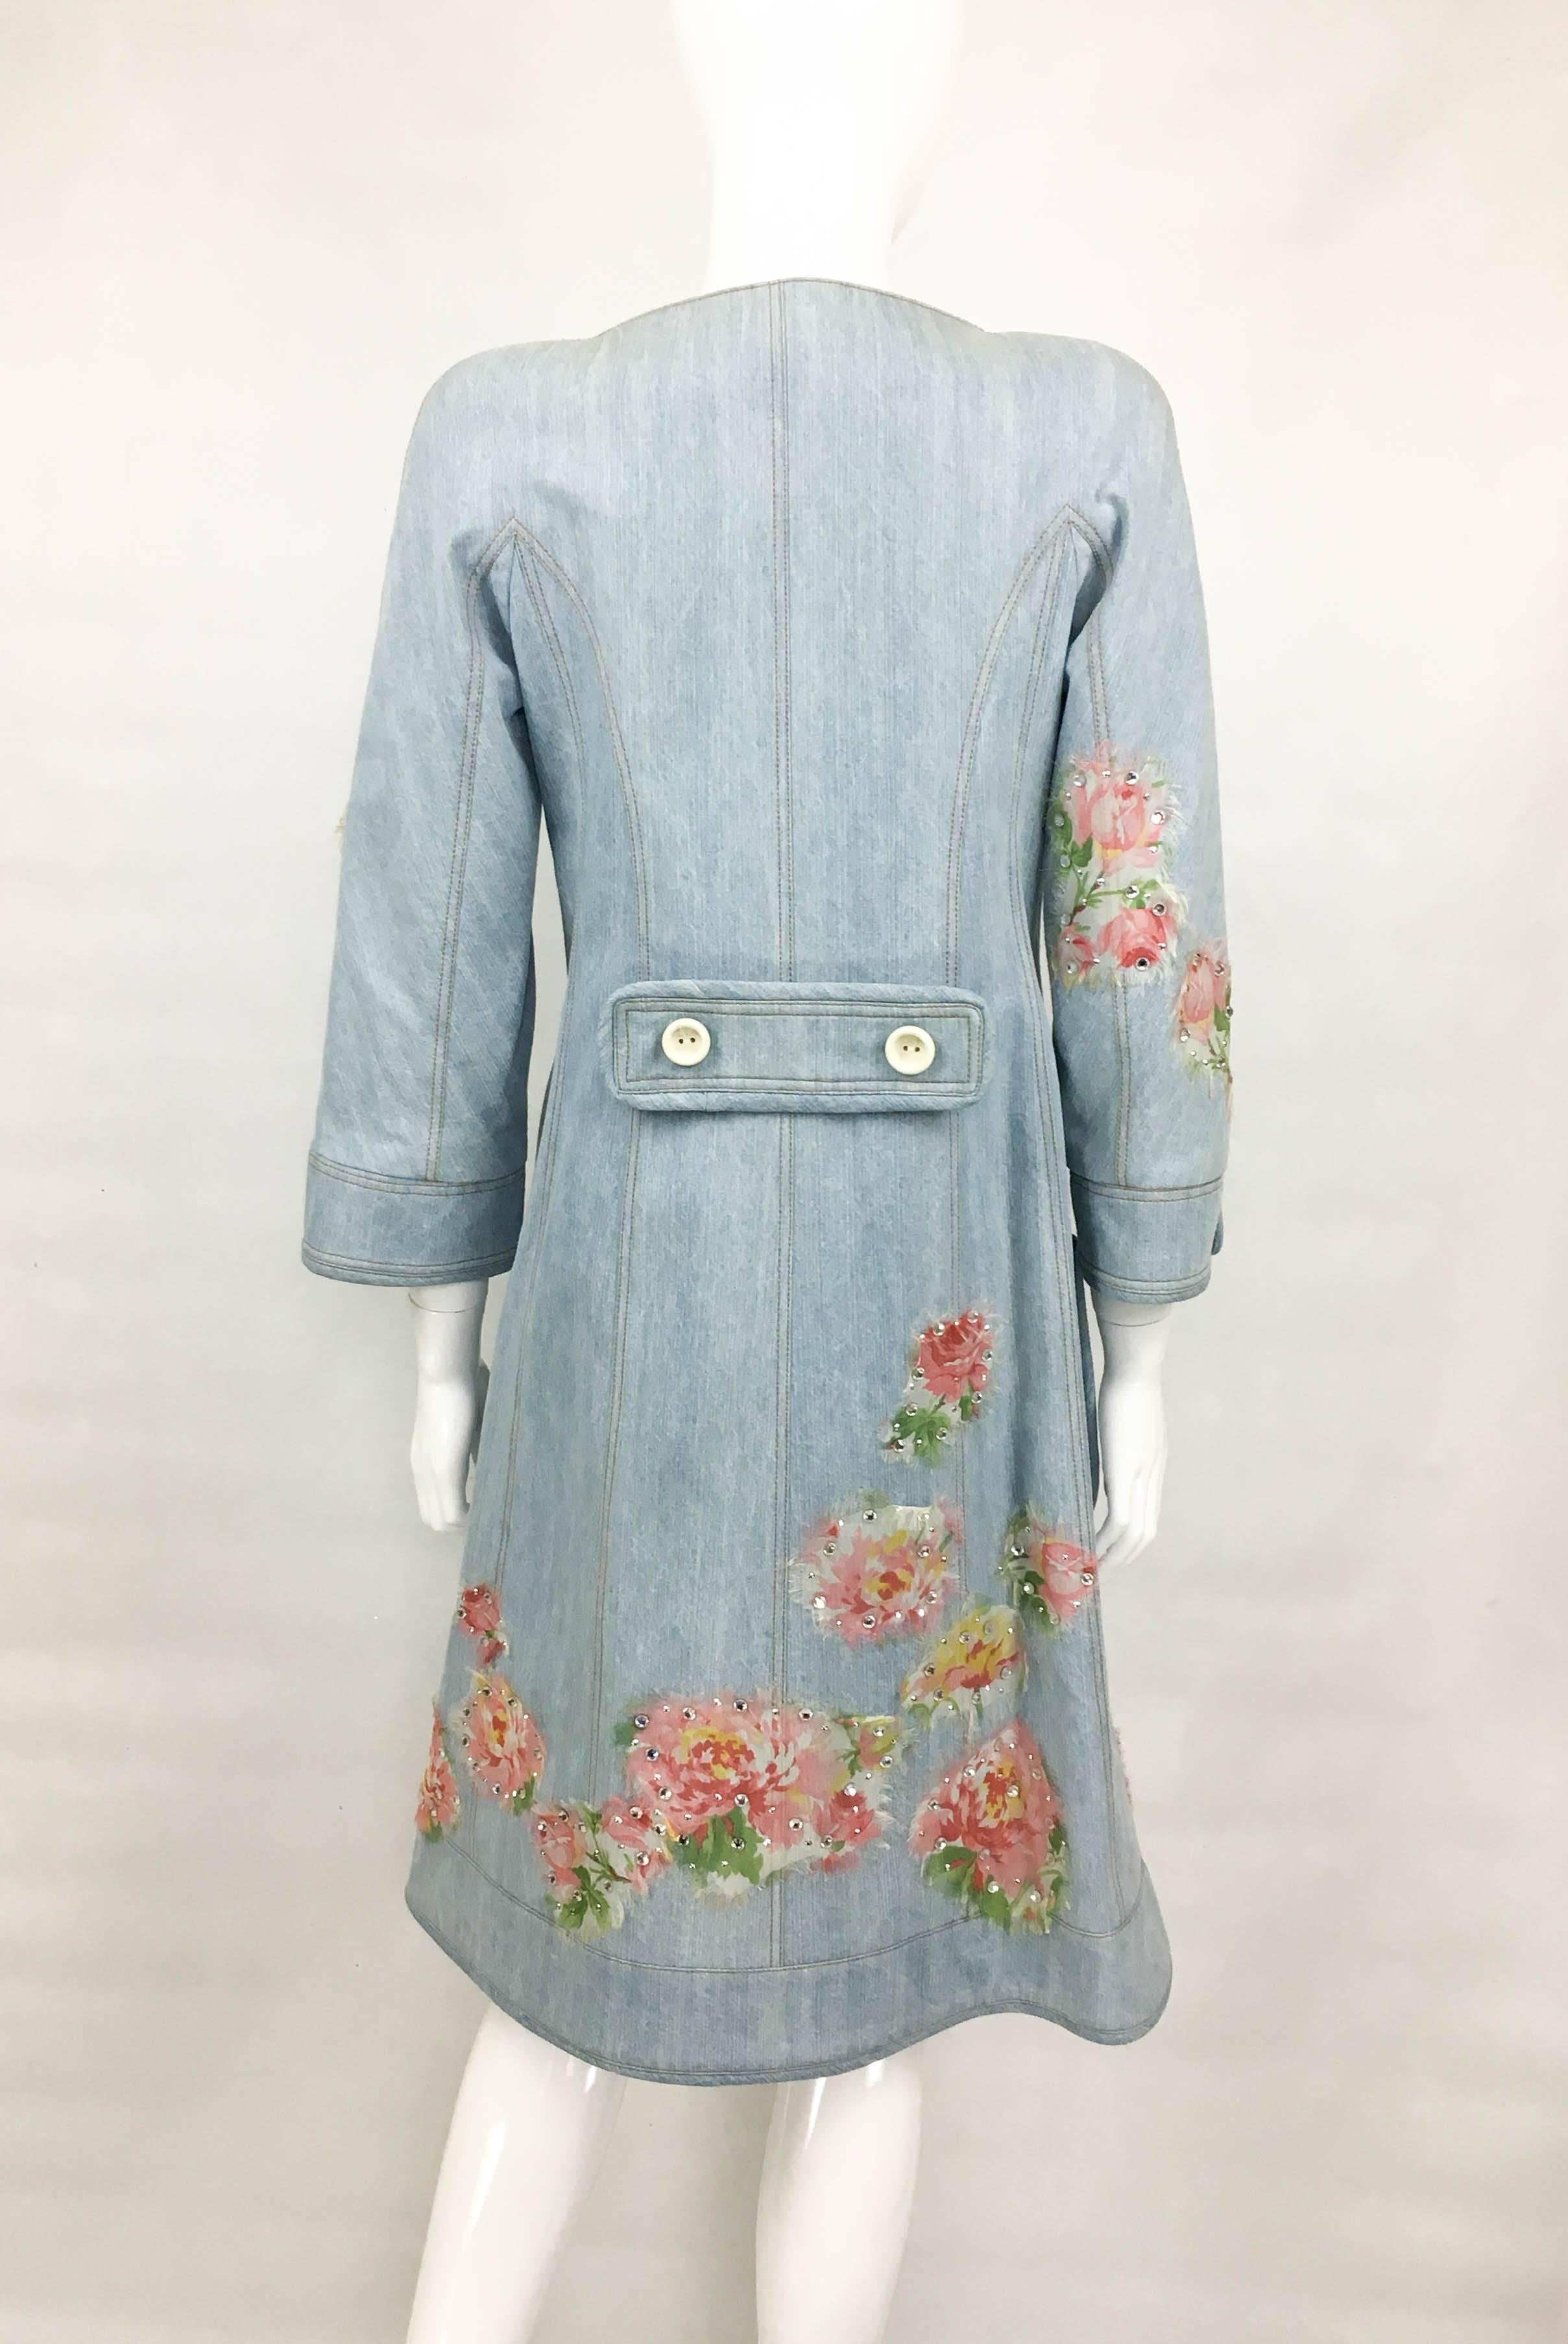 Dior by Galliano 2005 Runway Look Denim Shirt Dress With Crystals and Appliqués For Sale 1